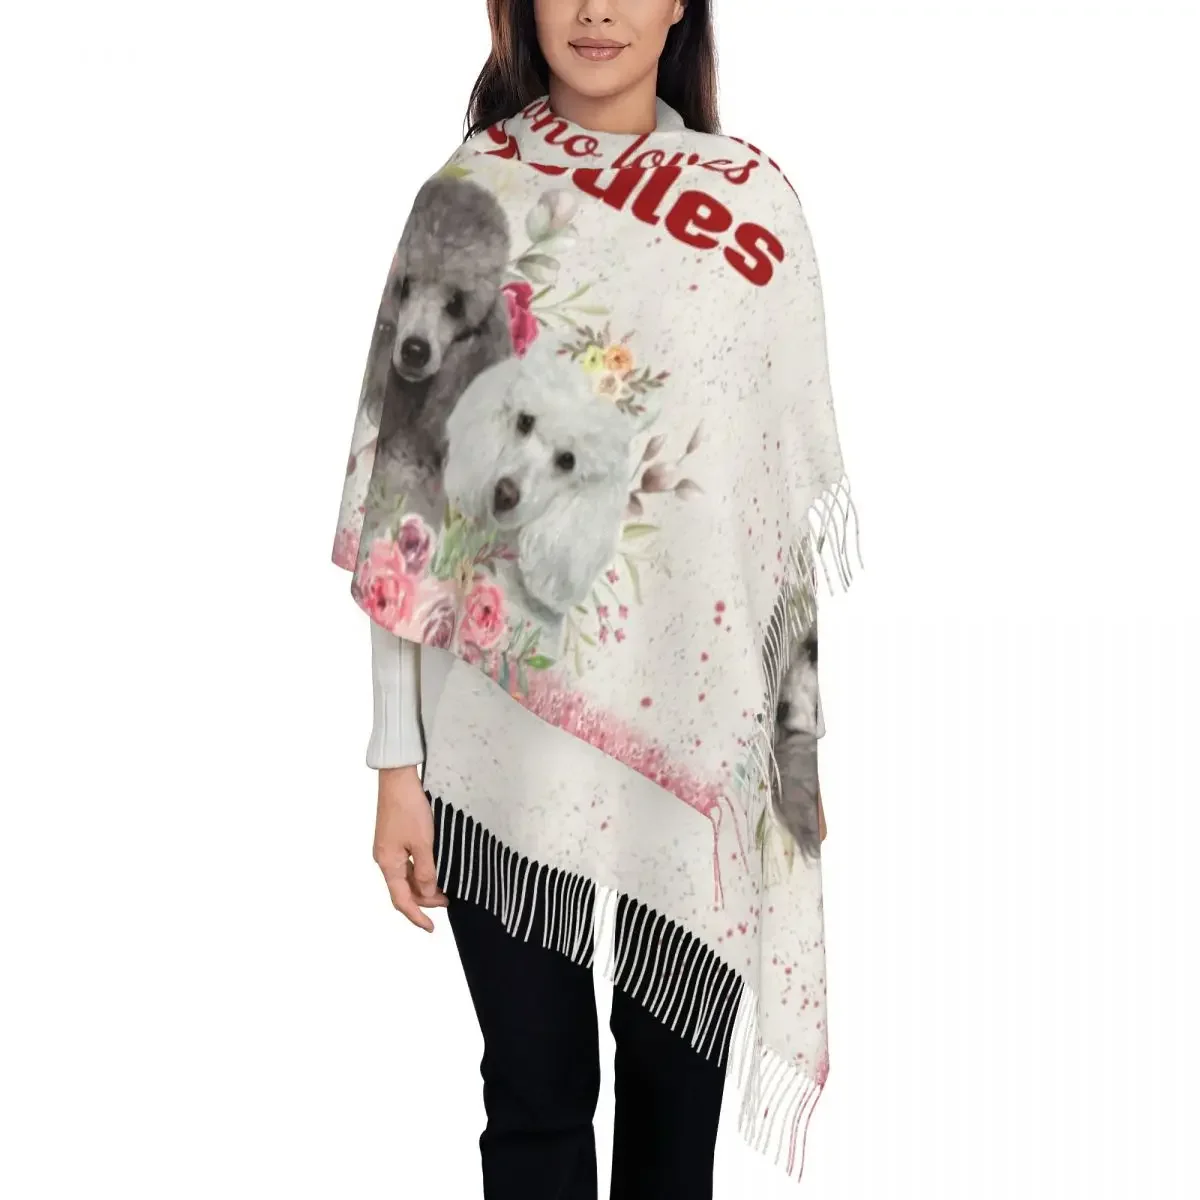 

Ladies Large Poodle Graphic Scarves Women Winter Fall Thick Warm Tassel Shawl Wraps Pudel Dog Lover Scarf